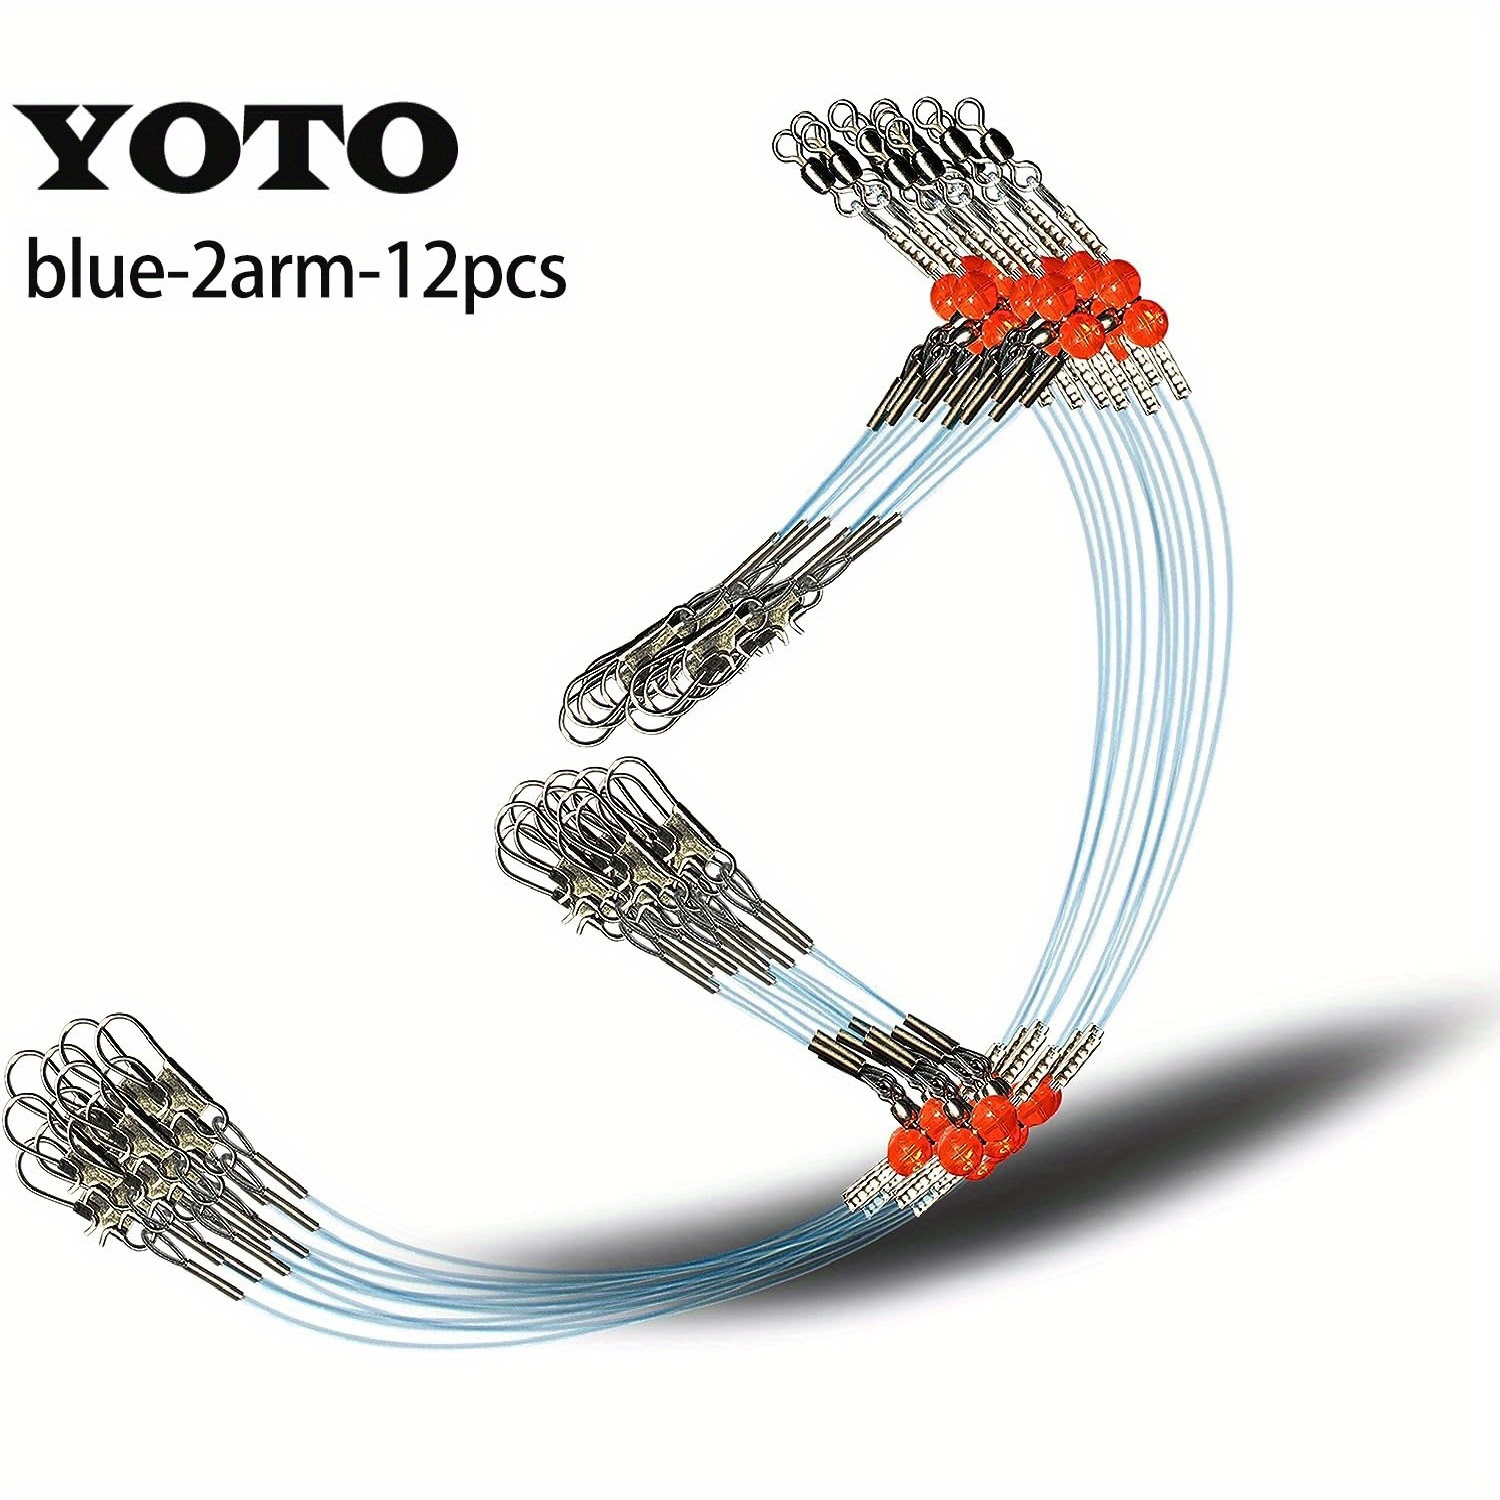 YOTO Fishing Leaders with 2 Arm, Stainless Steel Fishing Leaders